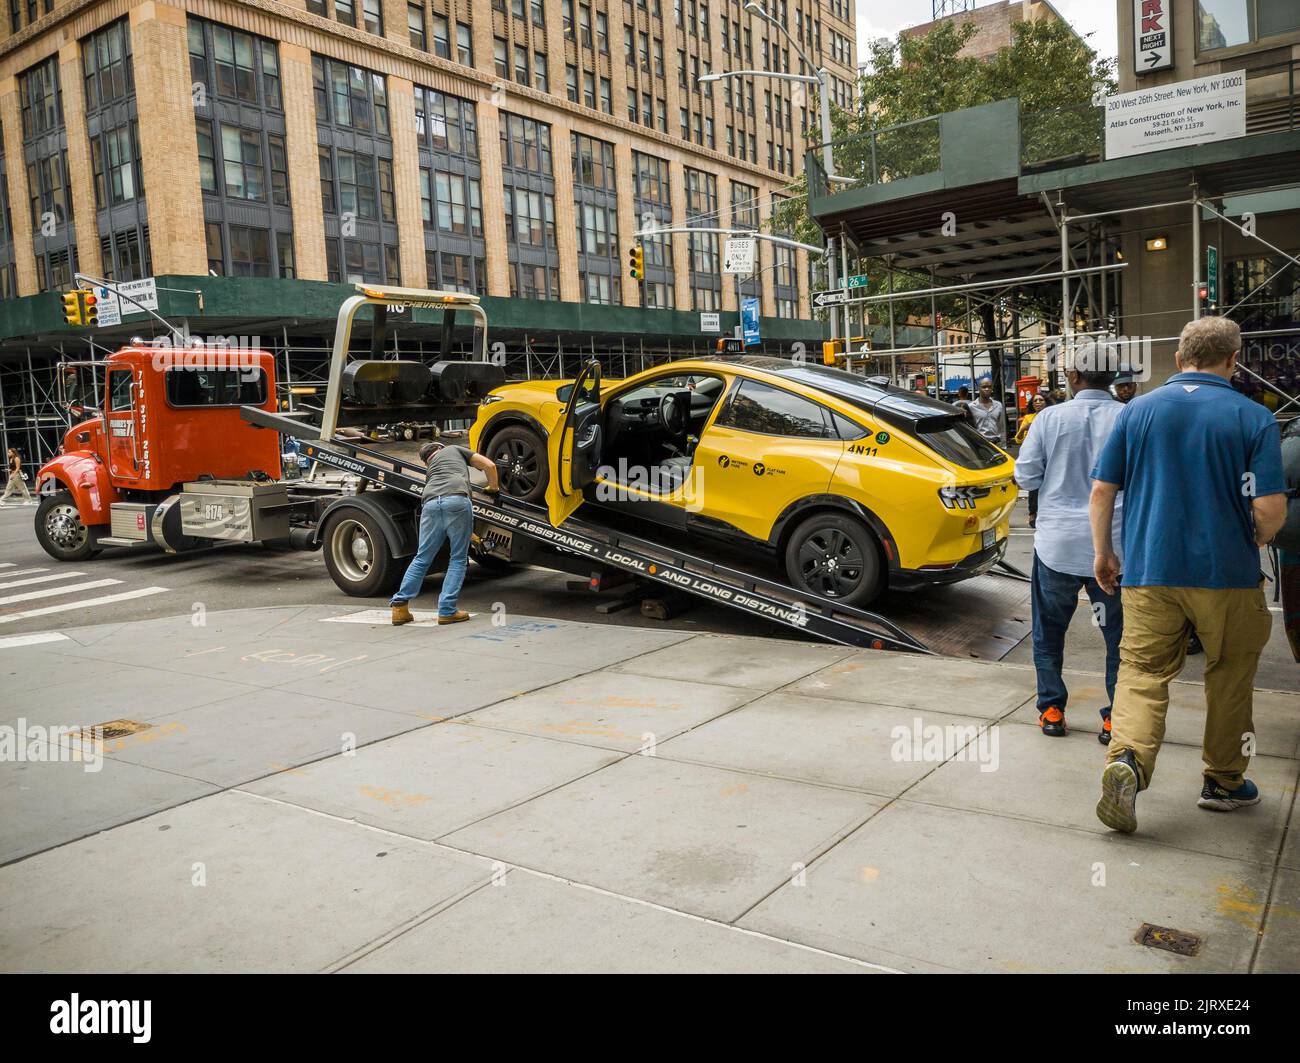 A tow truck prepares to remove a disabled Ford Mustang Mach-E EV taxi in Chelsea in New York on Sunday, August 21, 2022. In July Ford delivered 4,970 EV Mustangs outselling the gasoline powered Mustang. (© Richard B. Levine) Stock Photo